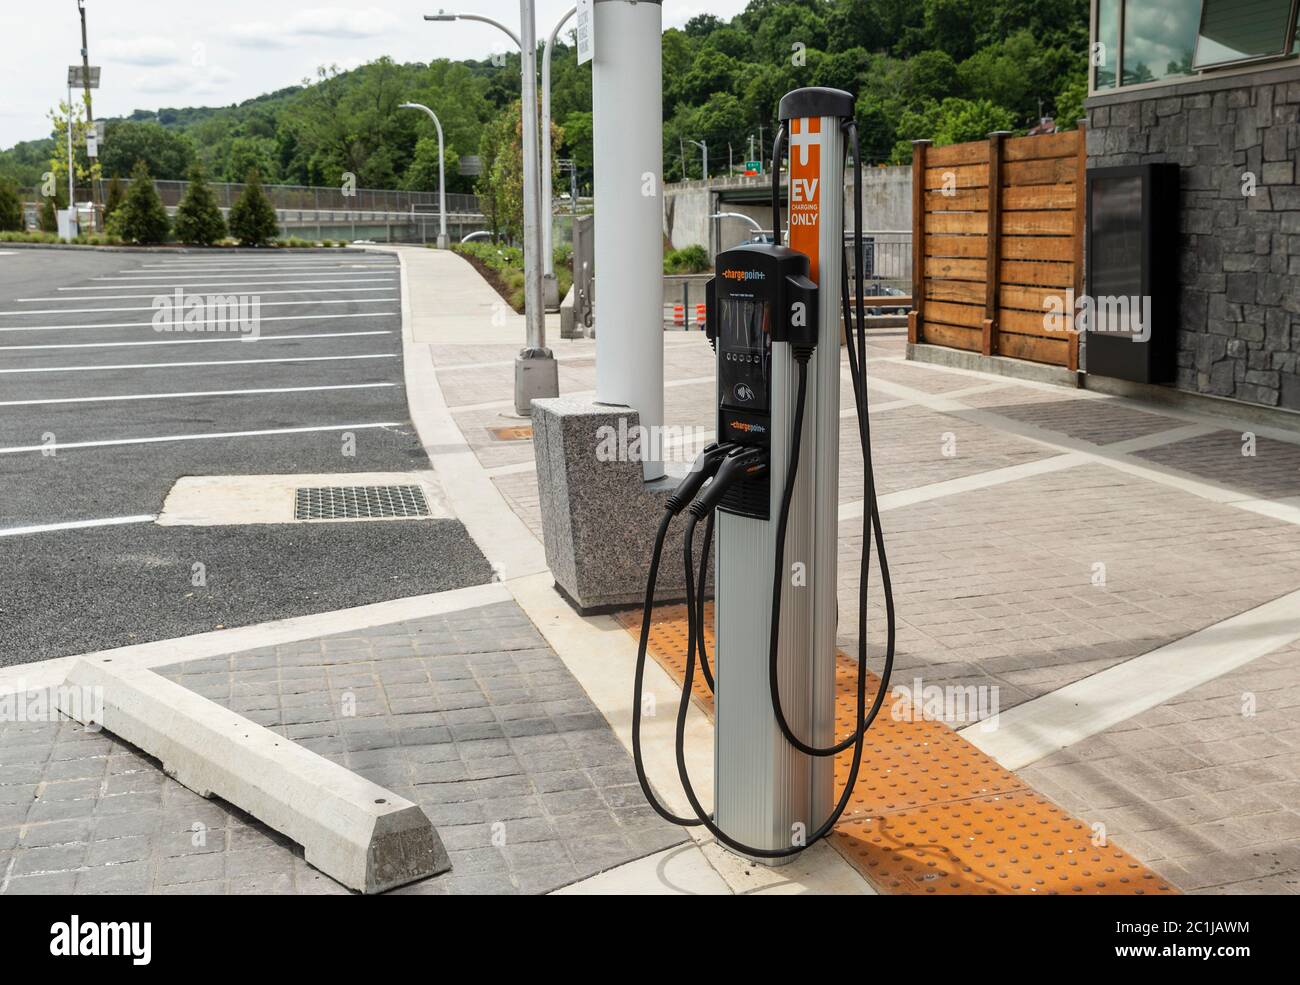 Tarrytown, NY - June 15, 2020: Electric vehicle charging station seen at Rockland landing of Mario Cuomo Bridge in Tarrytown. Stock Photo